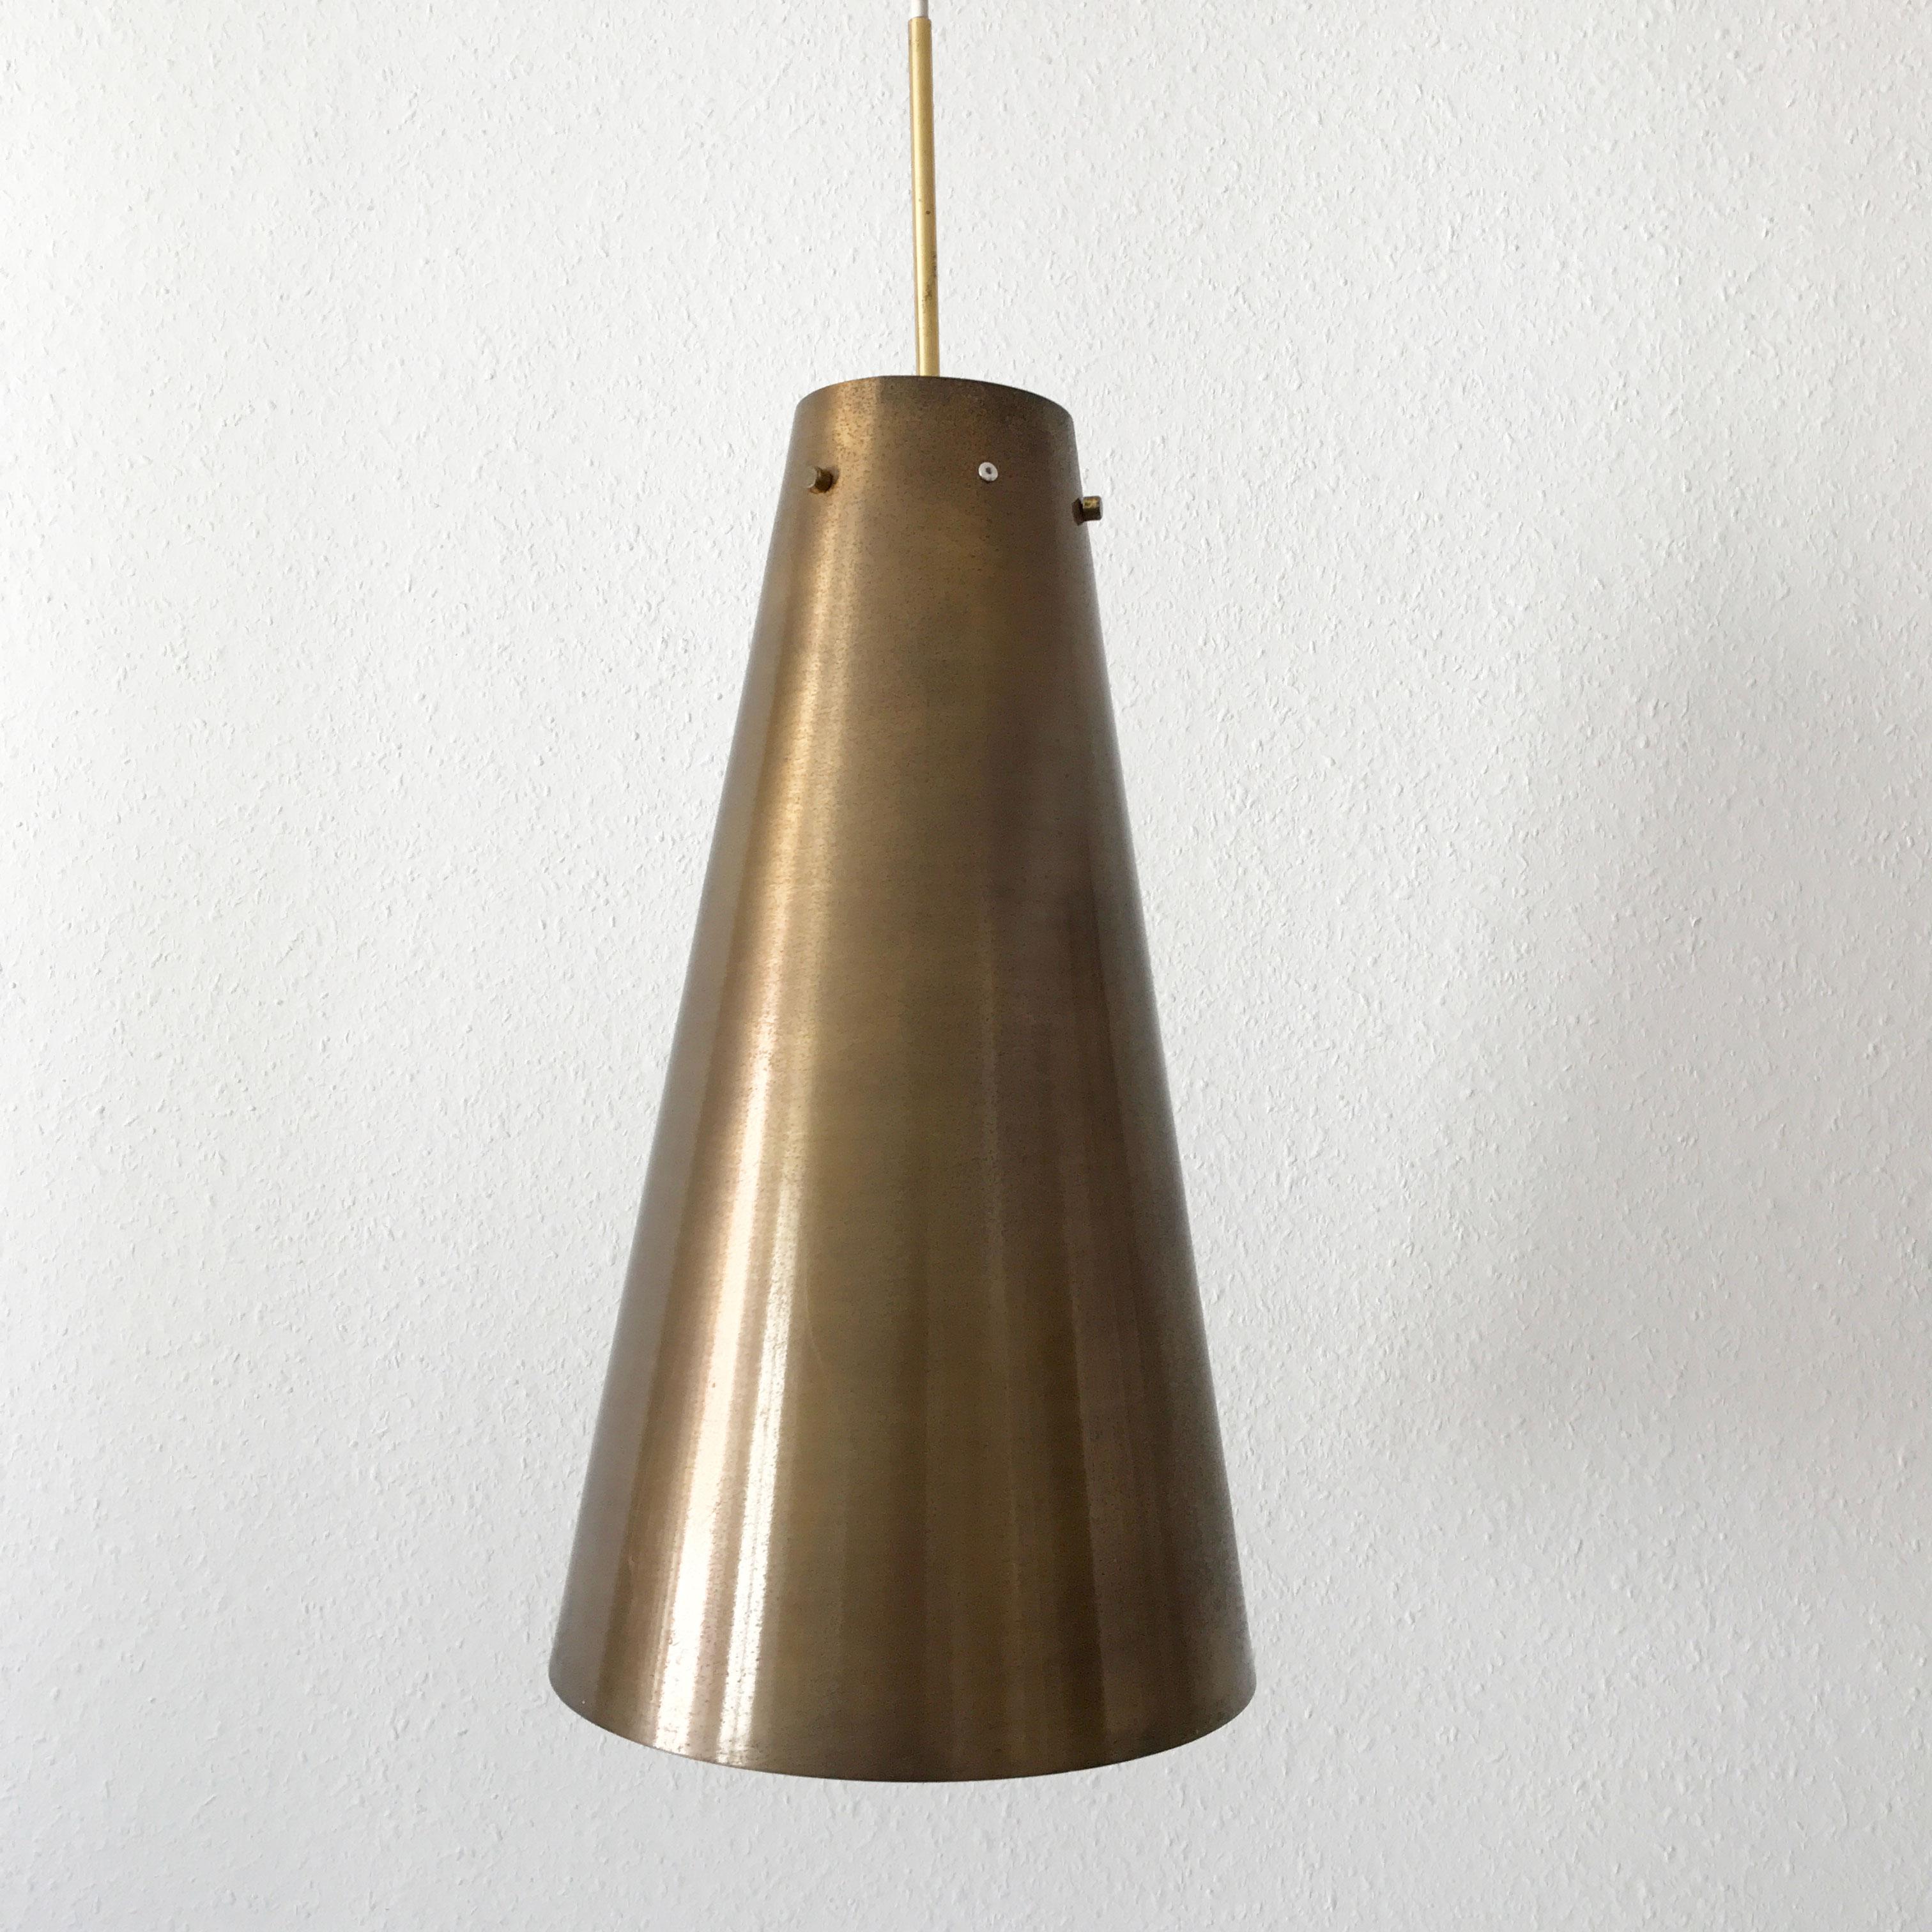 Rare and Large Mid-Century Modern Brass Pendant Lamp, 1950s, Germany 3